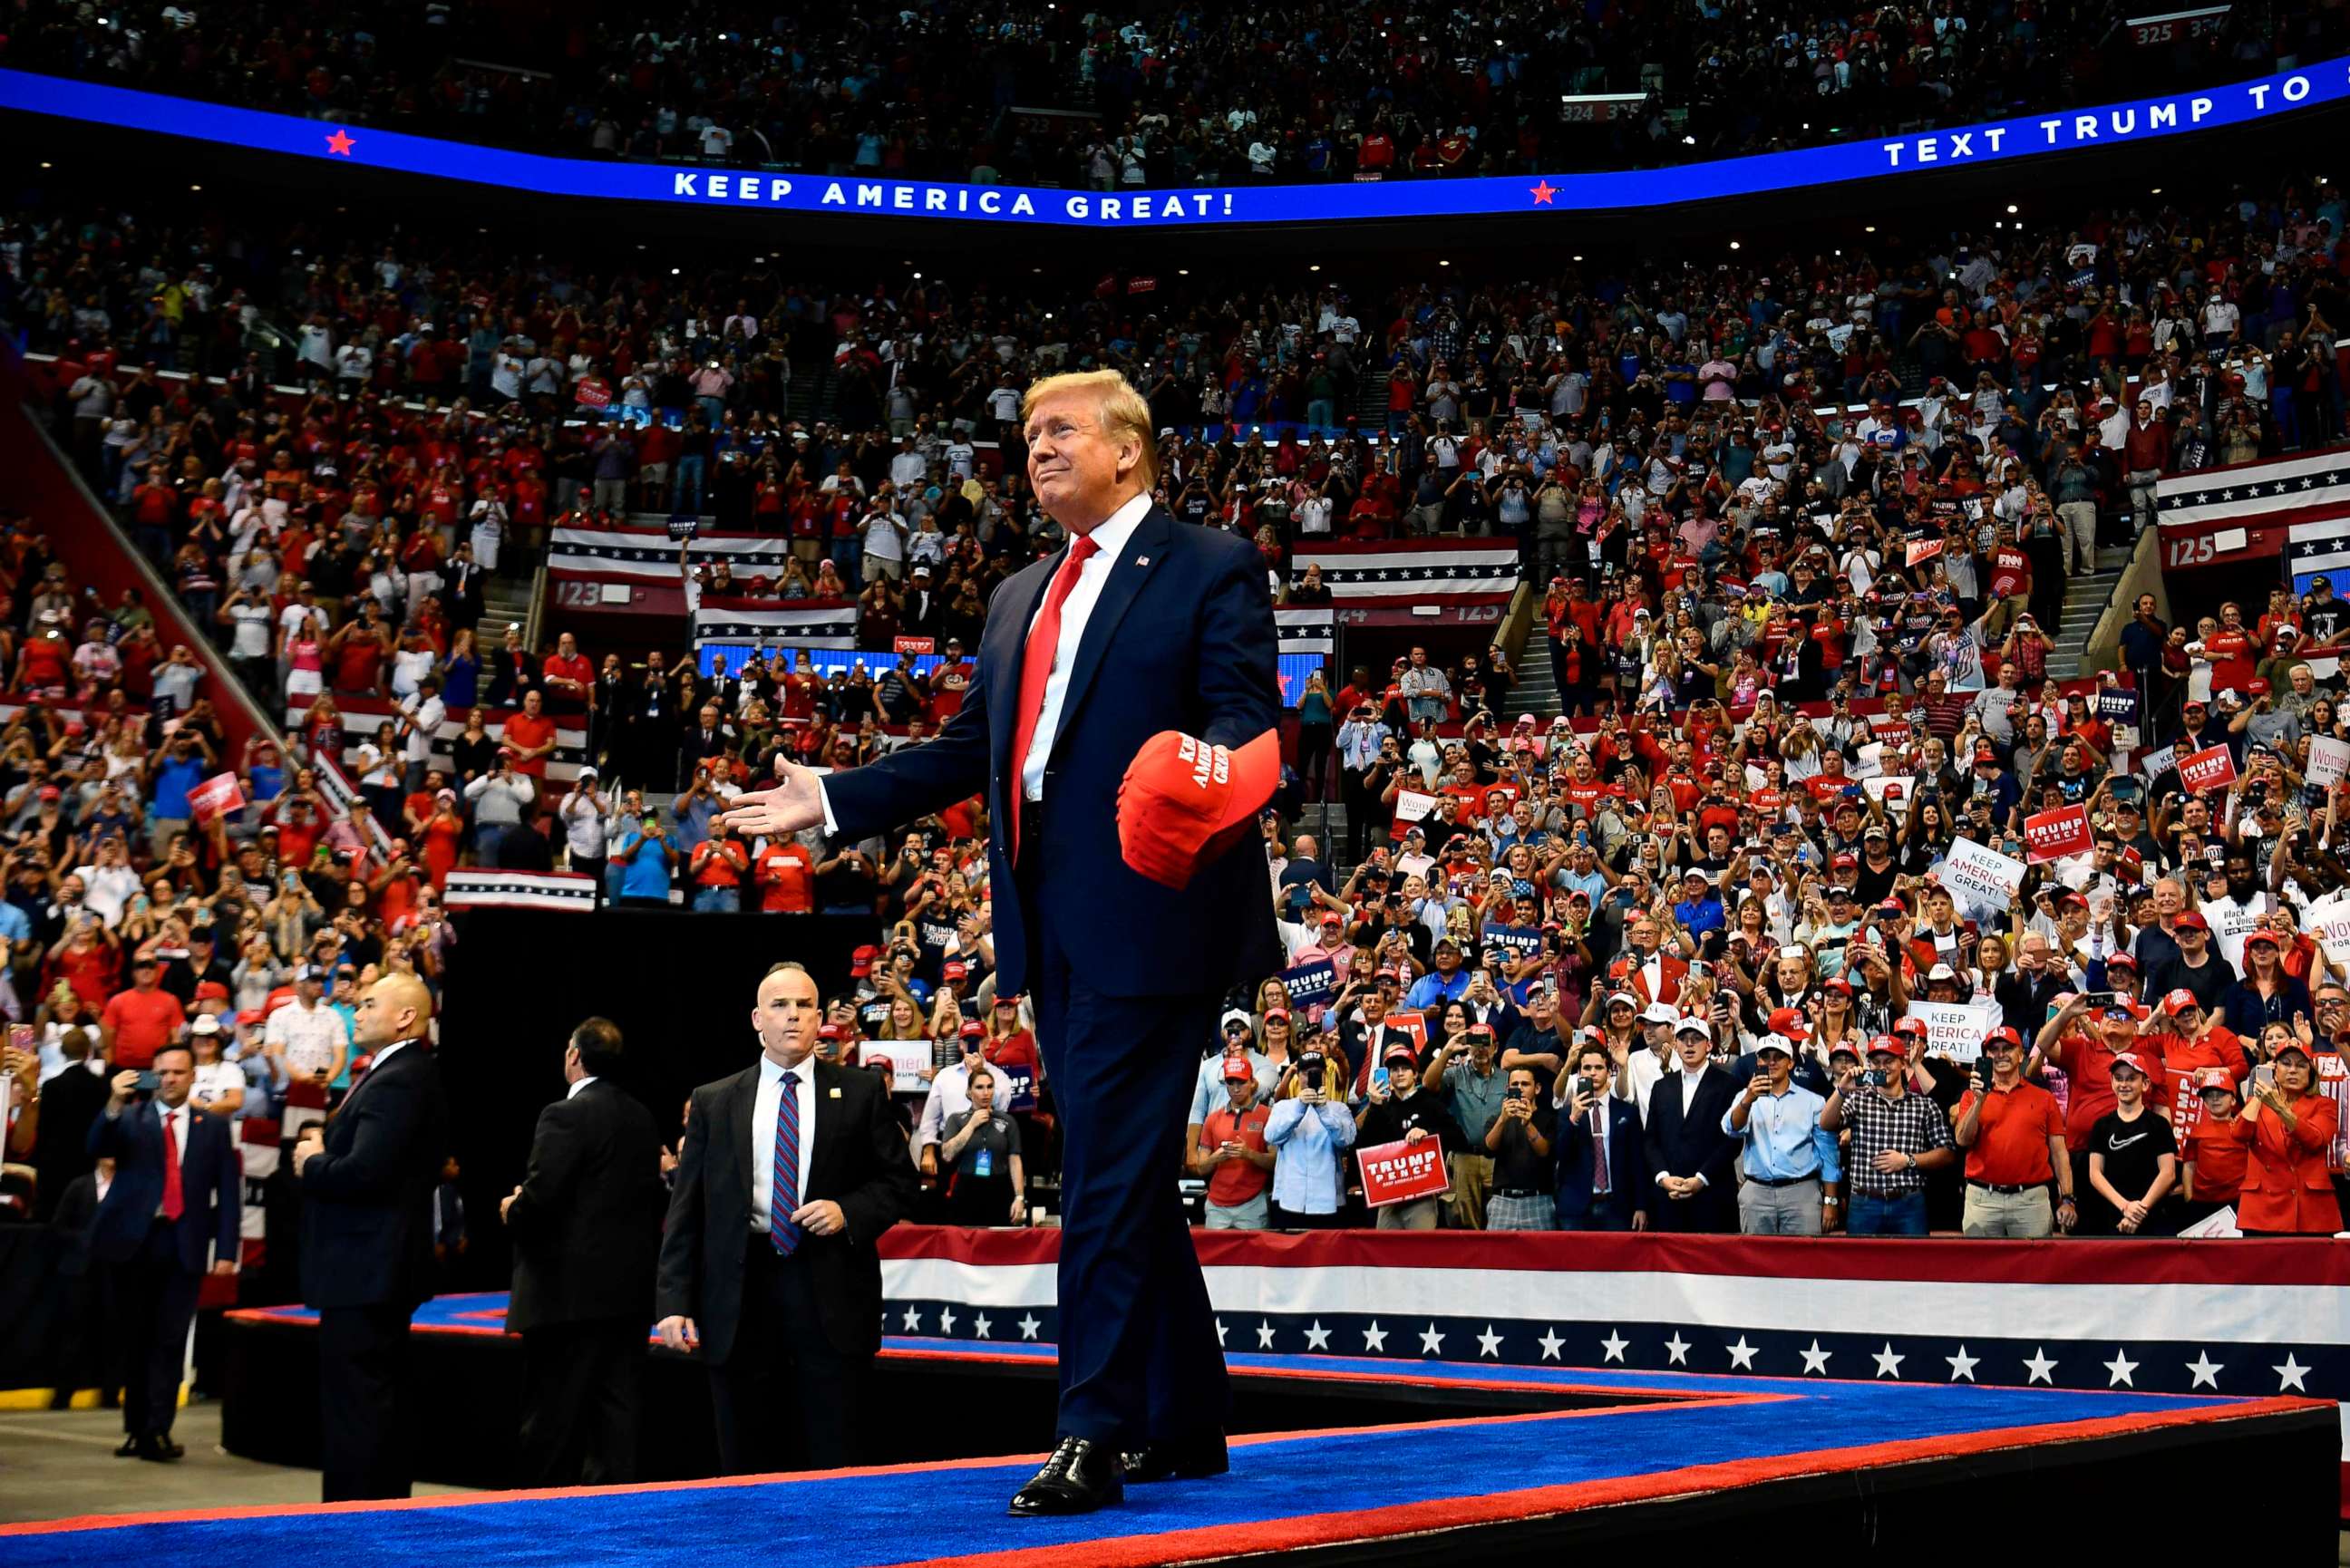 PHOTO: President Donald Trump arrives for a "Keep America Great" campaign rally at the BB&T Center in Sunrise, Fla. on Nov. 26, 2019.